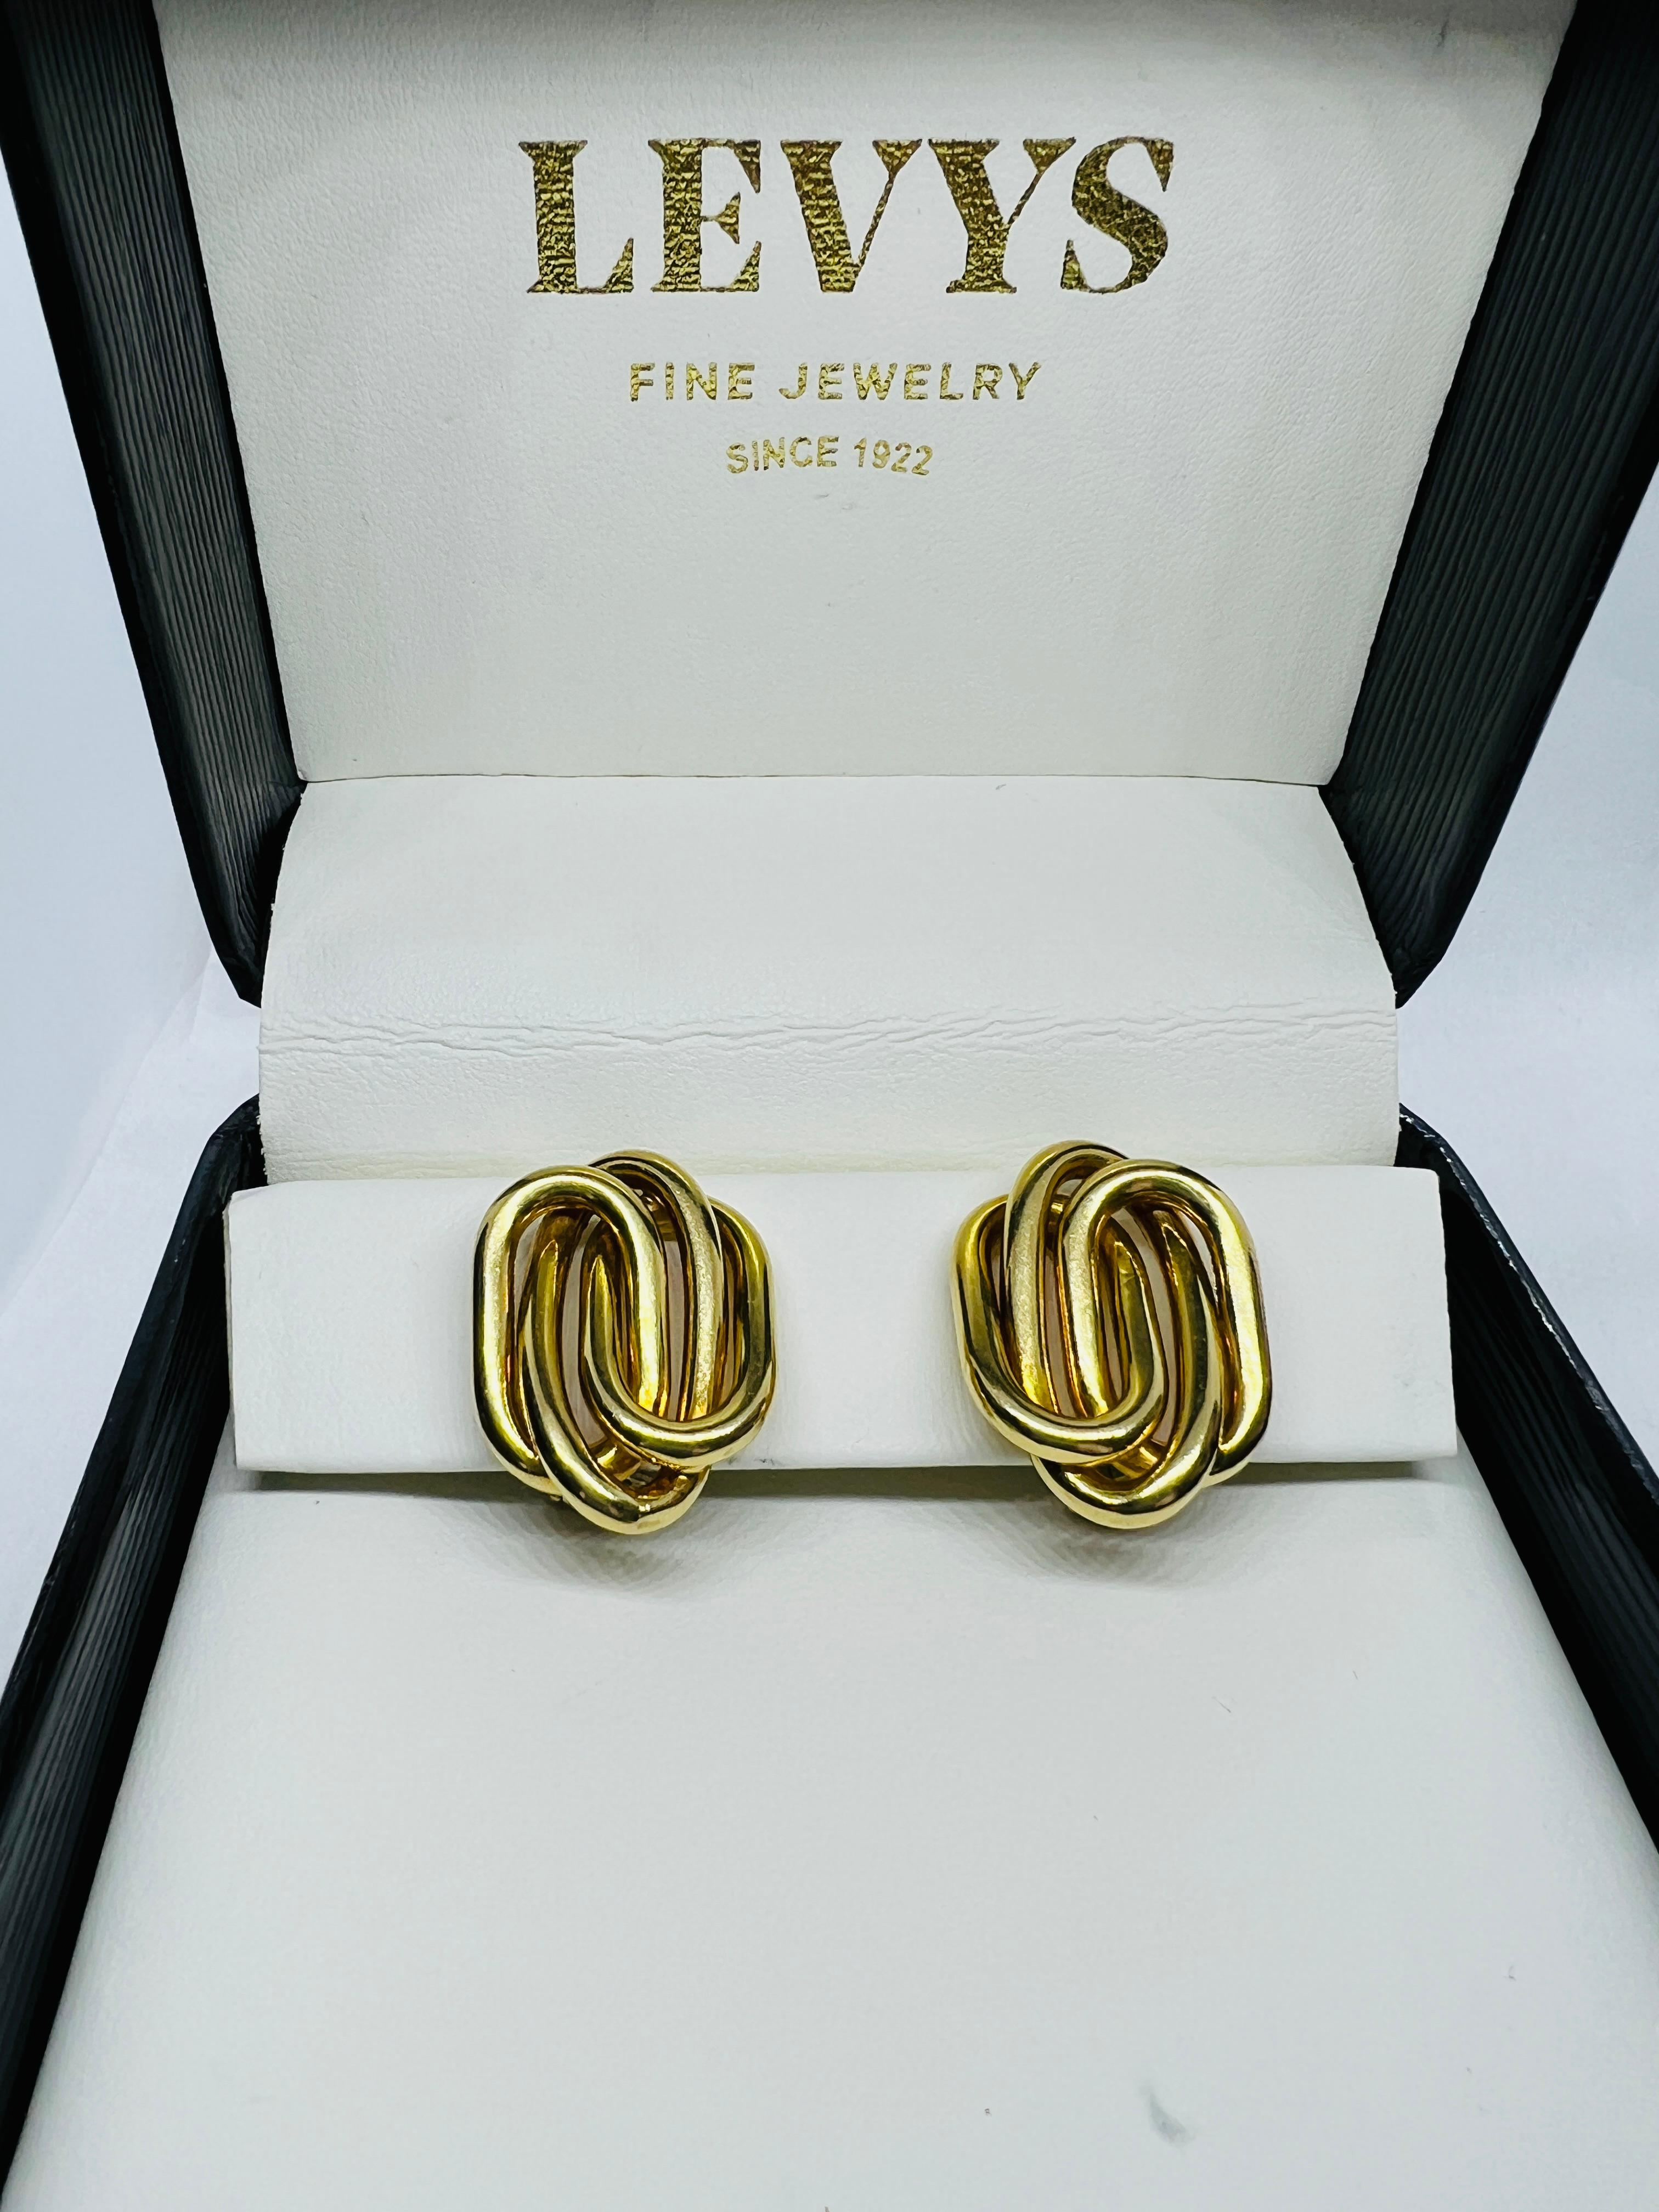 Beautiful Designer Bvlgari clip on earrings. These Mid Century Modern earrings are just stunning. They are made in 18K yellow gold. They measure one inch by three quarter inch and weigh 13.5 grams. The gold is shaped into three interconnected oblong